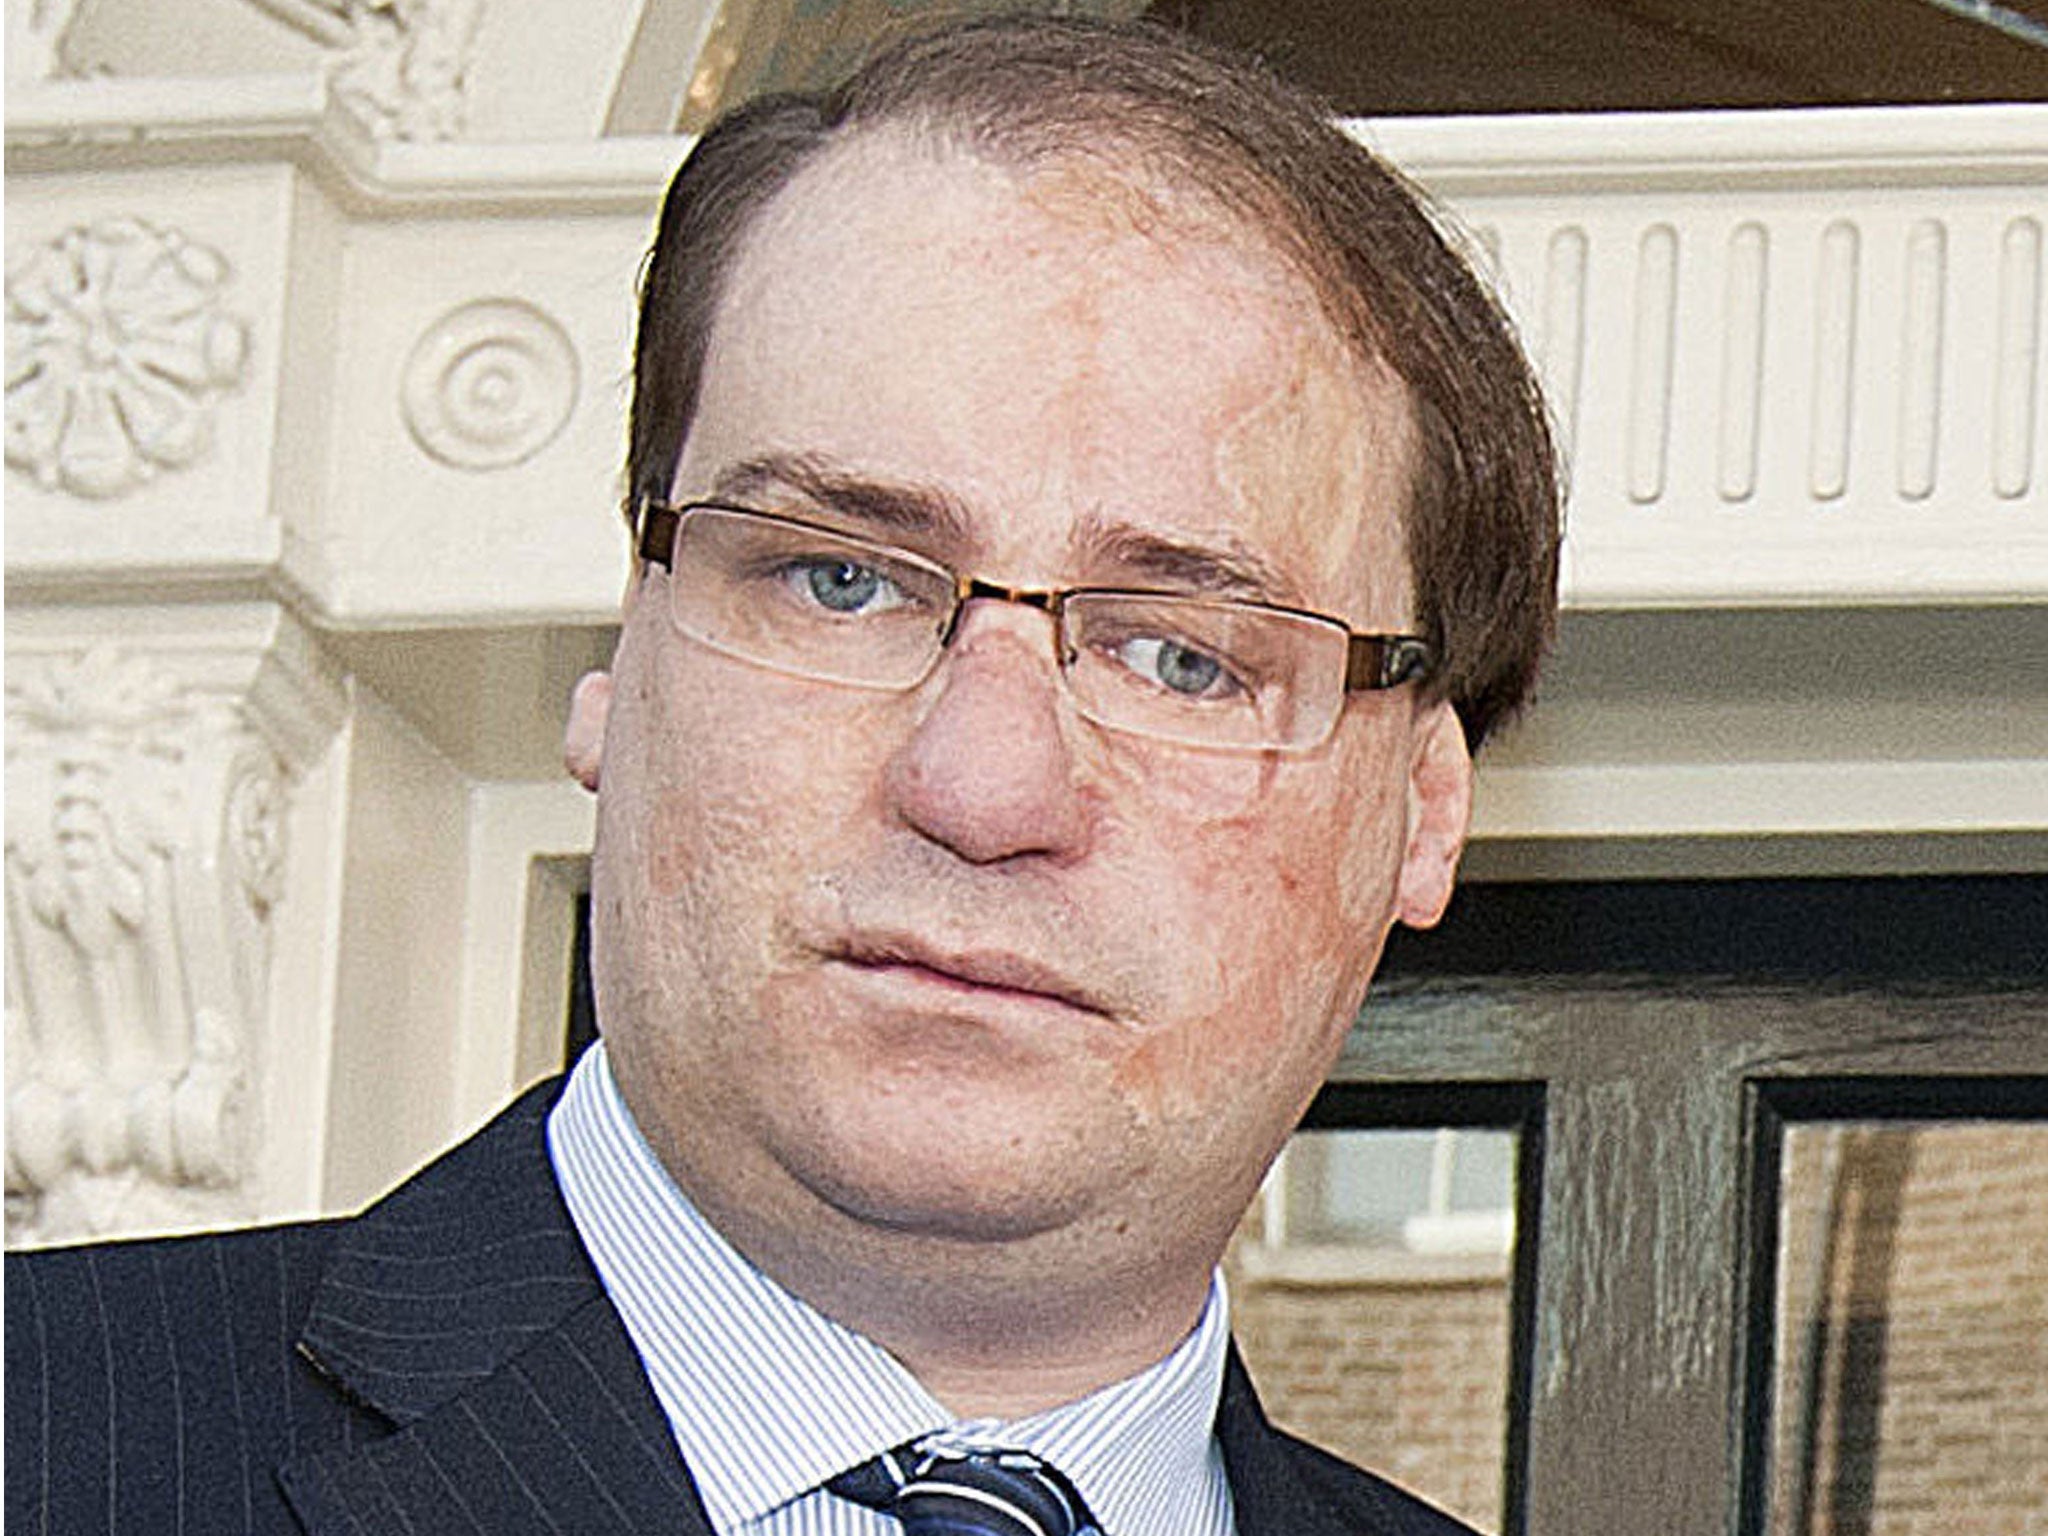 File photo of Independent TD for Dublin West Patrick Nulty, who has resigned after admitting sending inappropriate messages to a teenage girl over Facebook